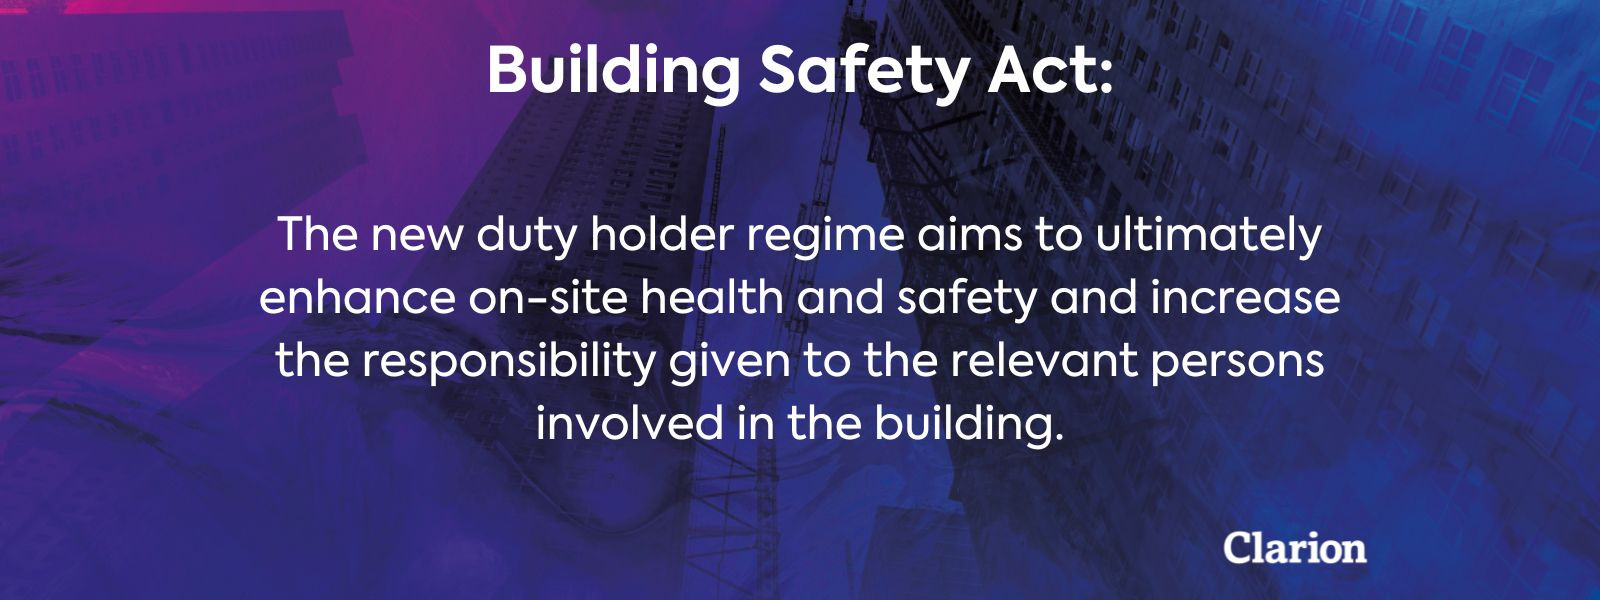 Building Safety Act: Duties of a Duty Holder – Cli...